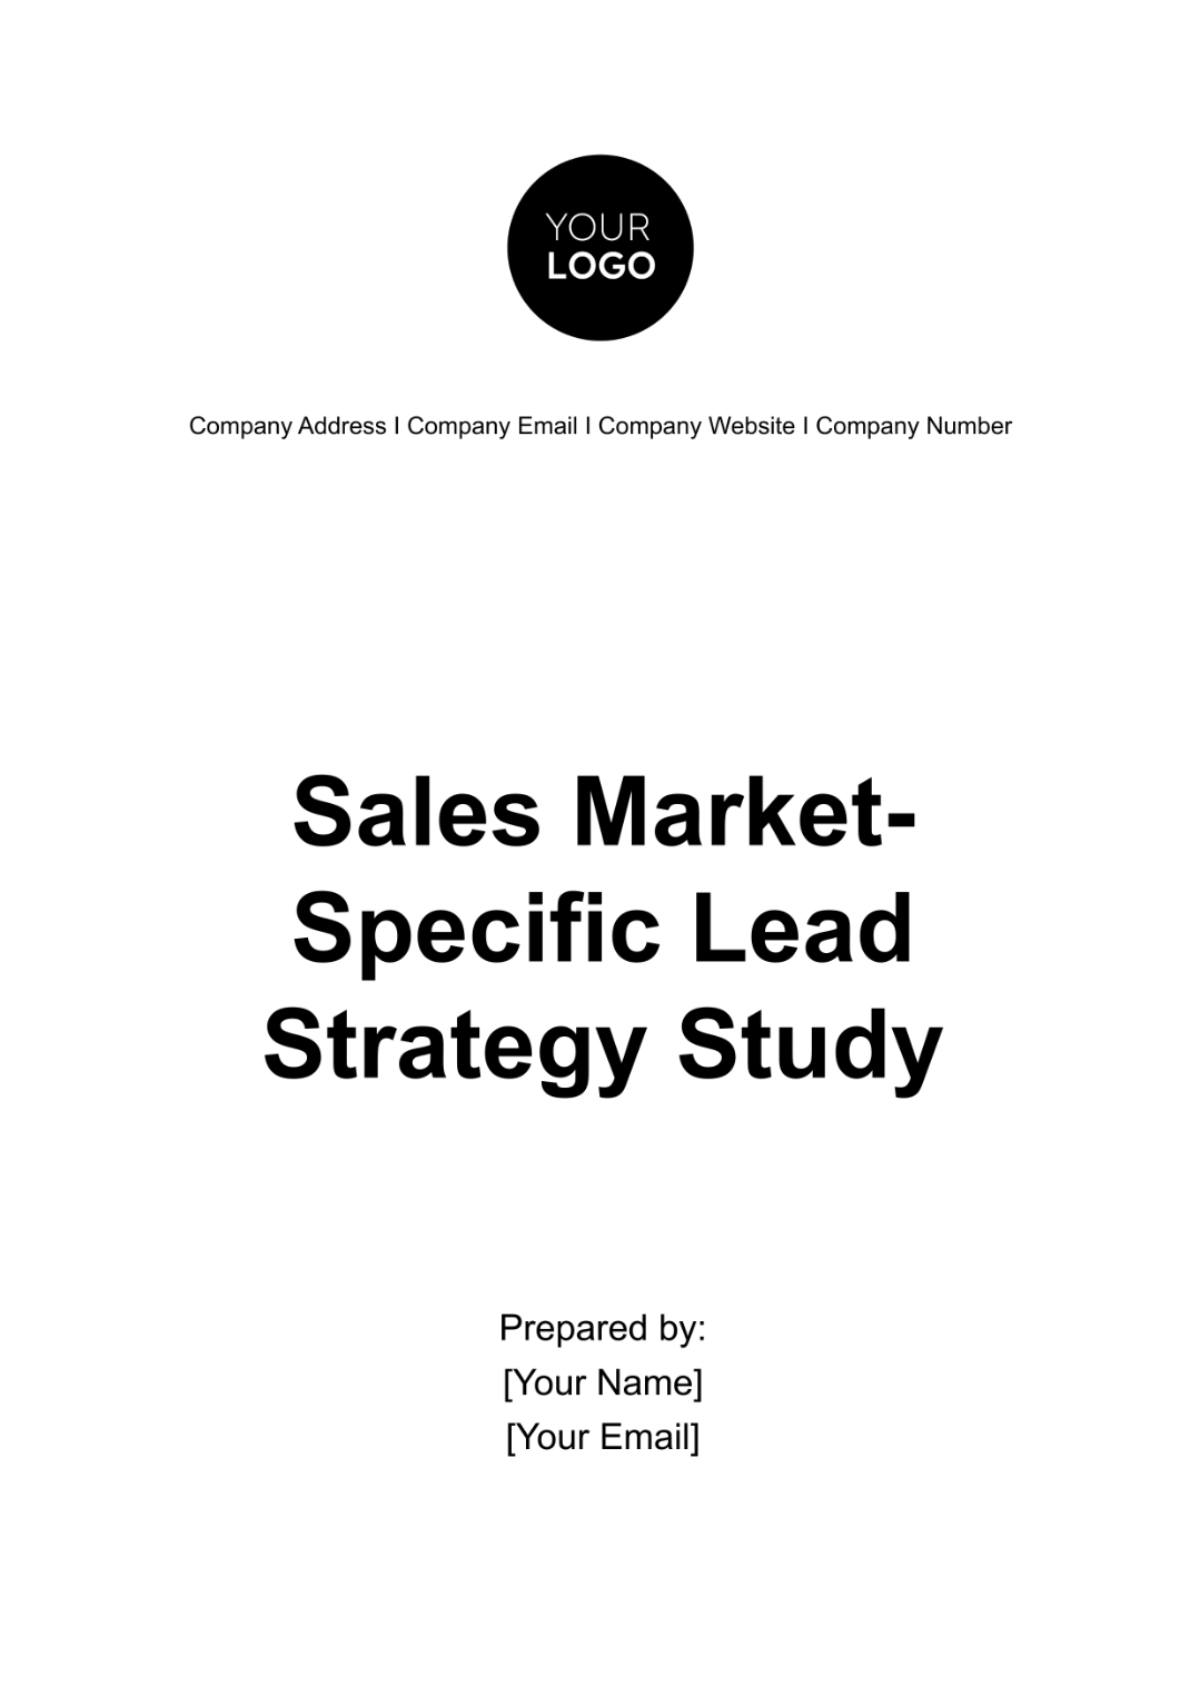 Sales Market-Specific Lead Strategy Study Template